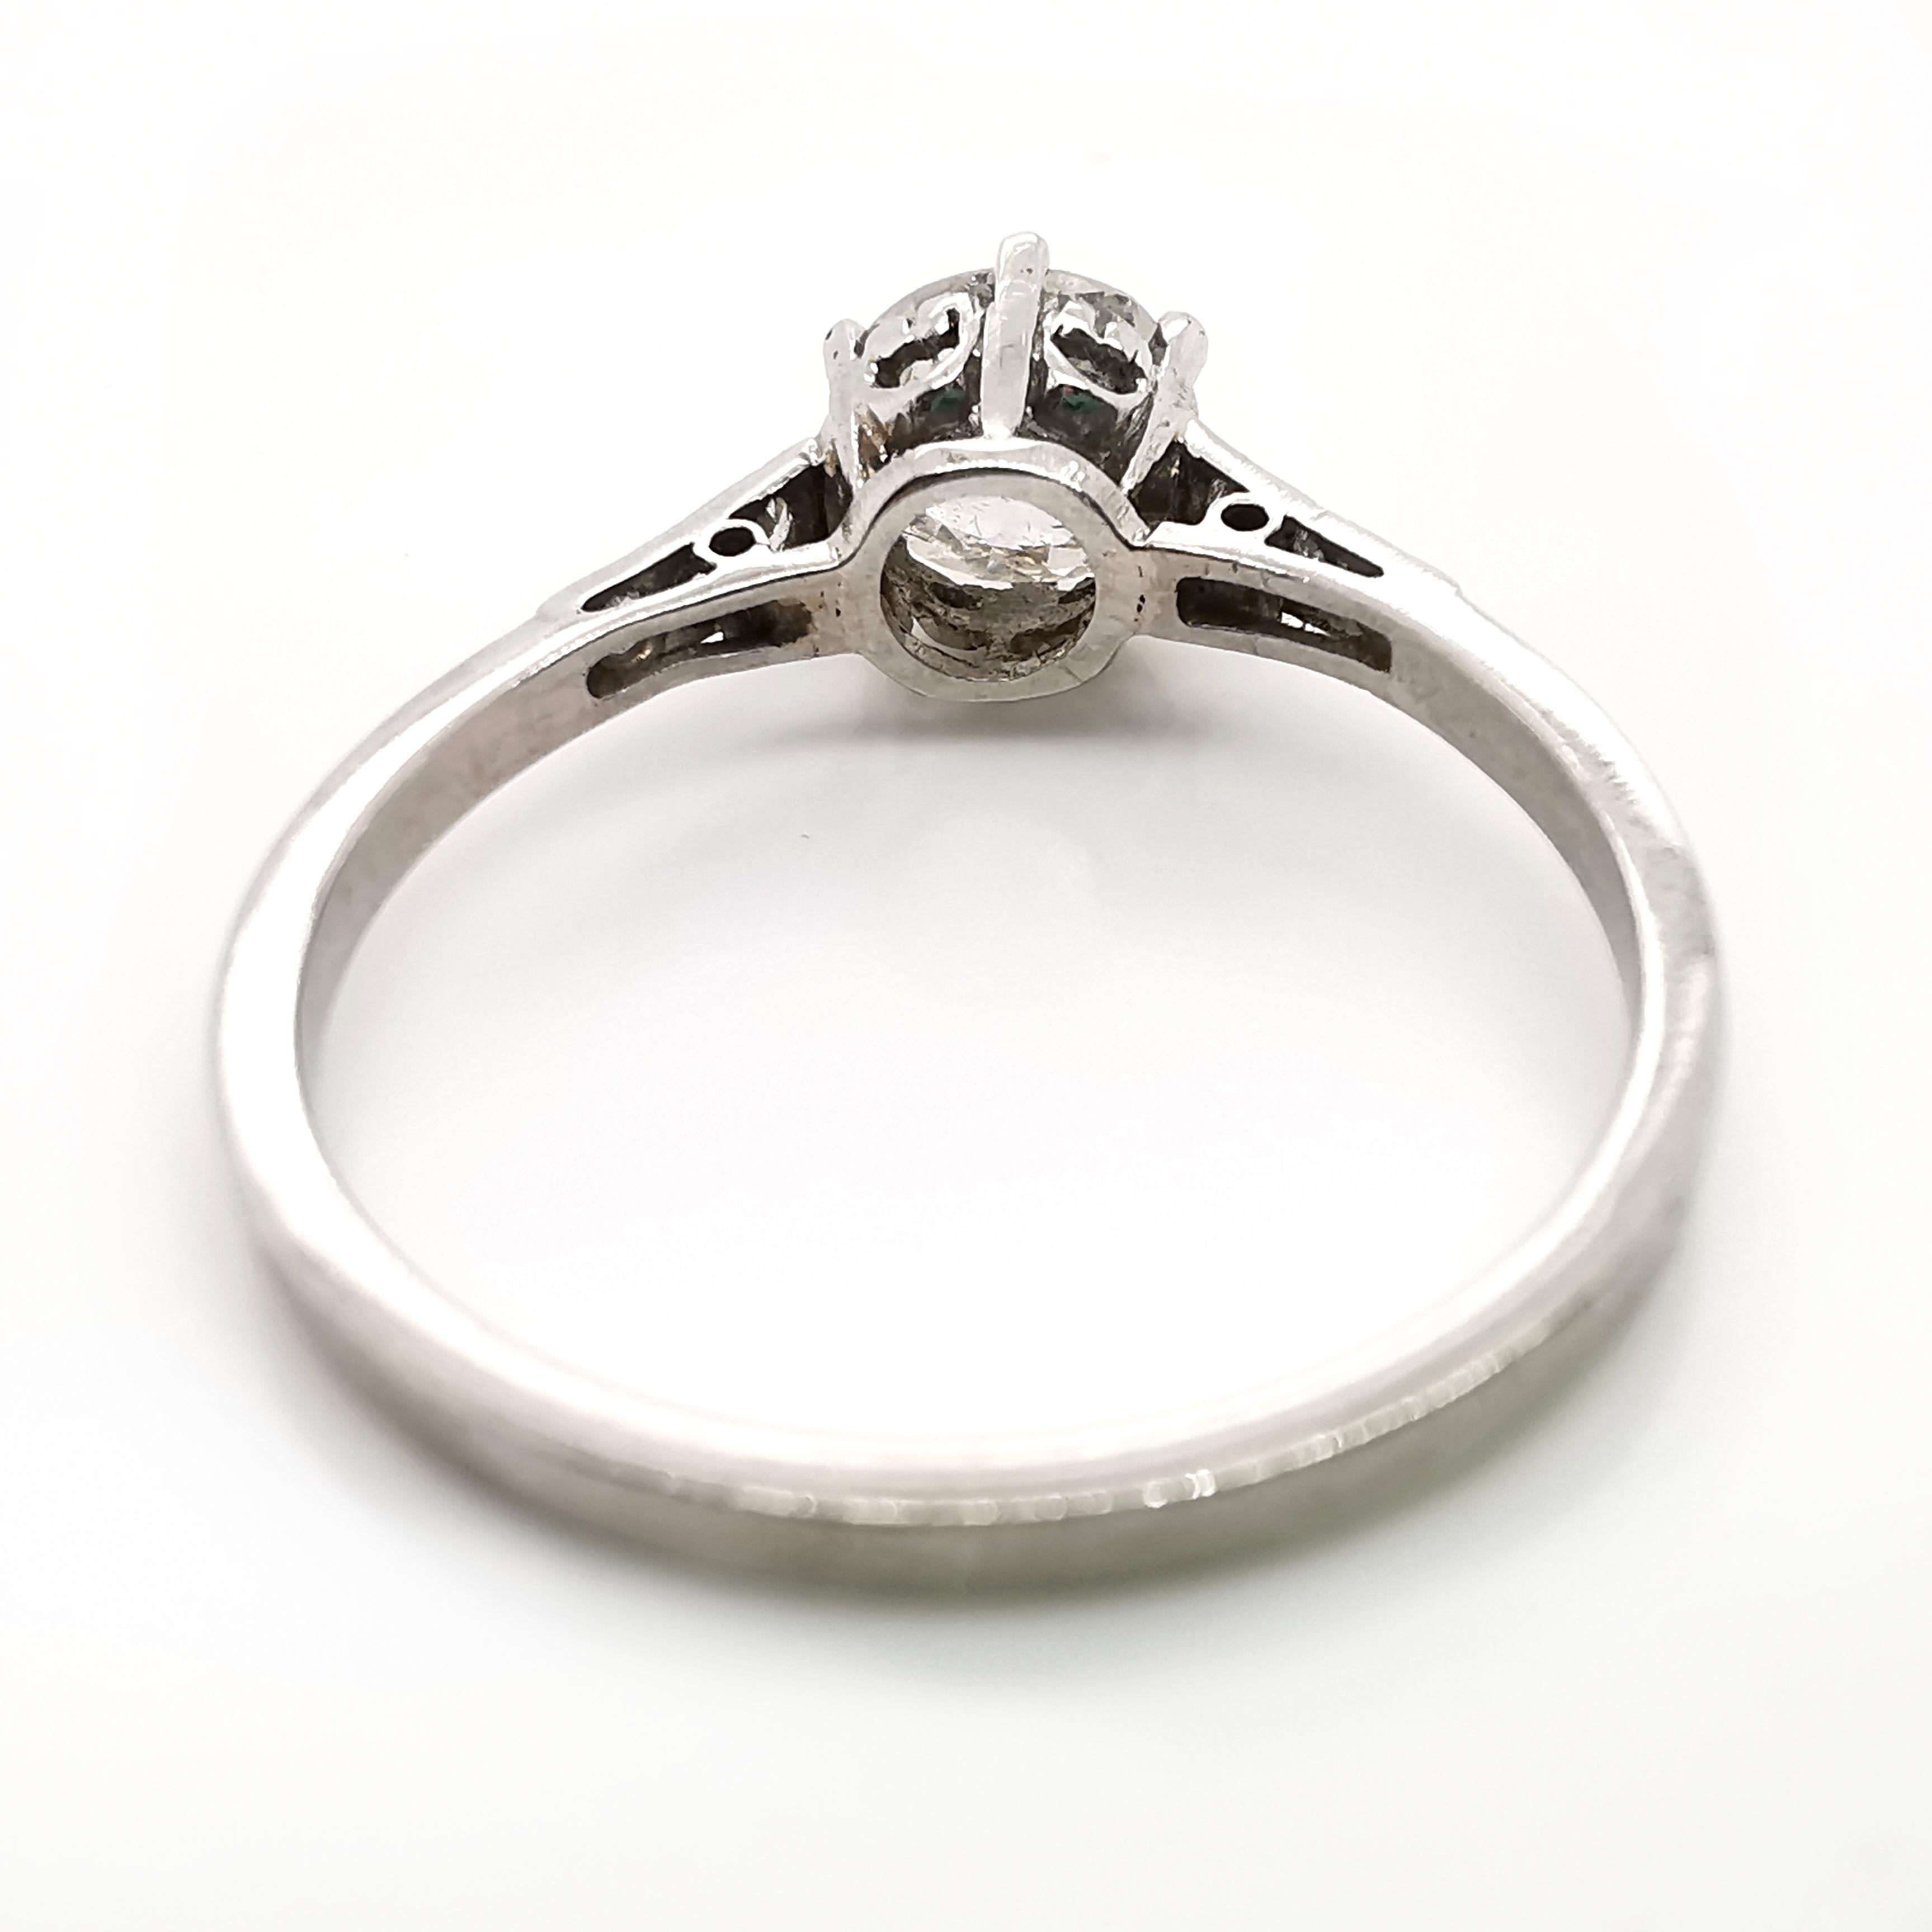 Art Deco Single Stone Diamond and Platinum Ring, 0.84 Carat, circa 1930 In Excellent Condition For Sale In London, GB